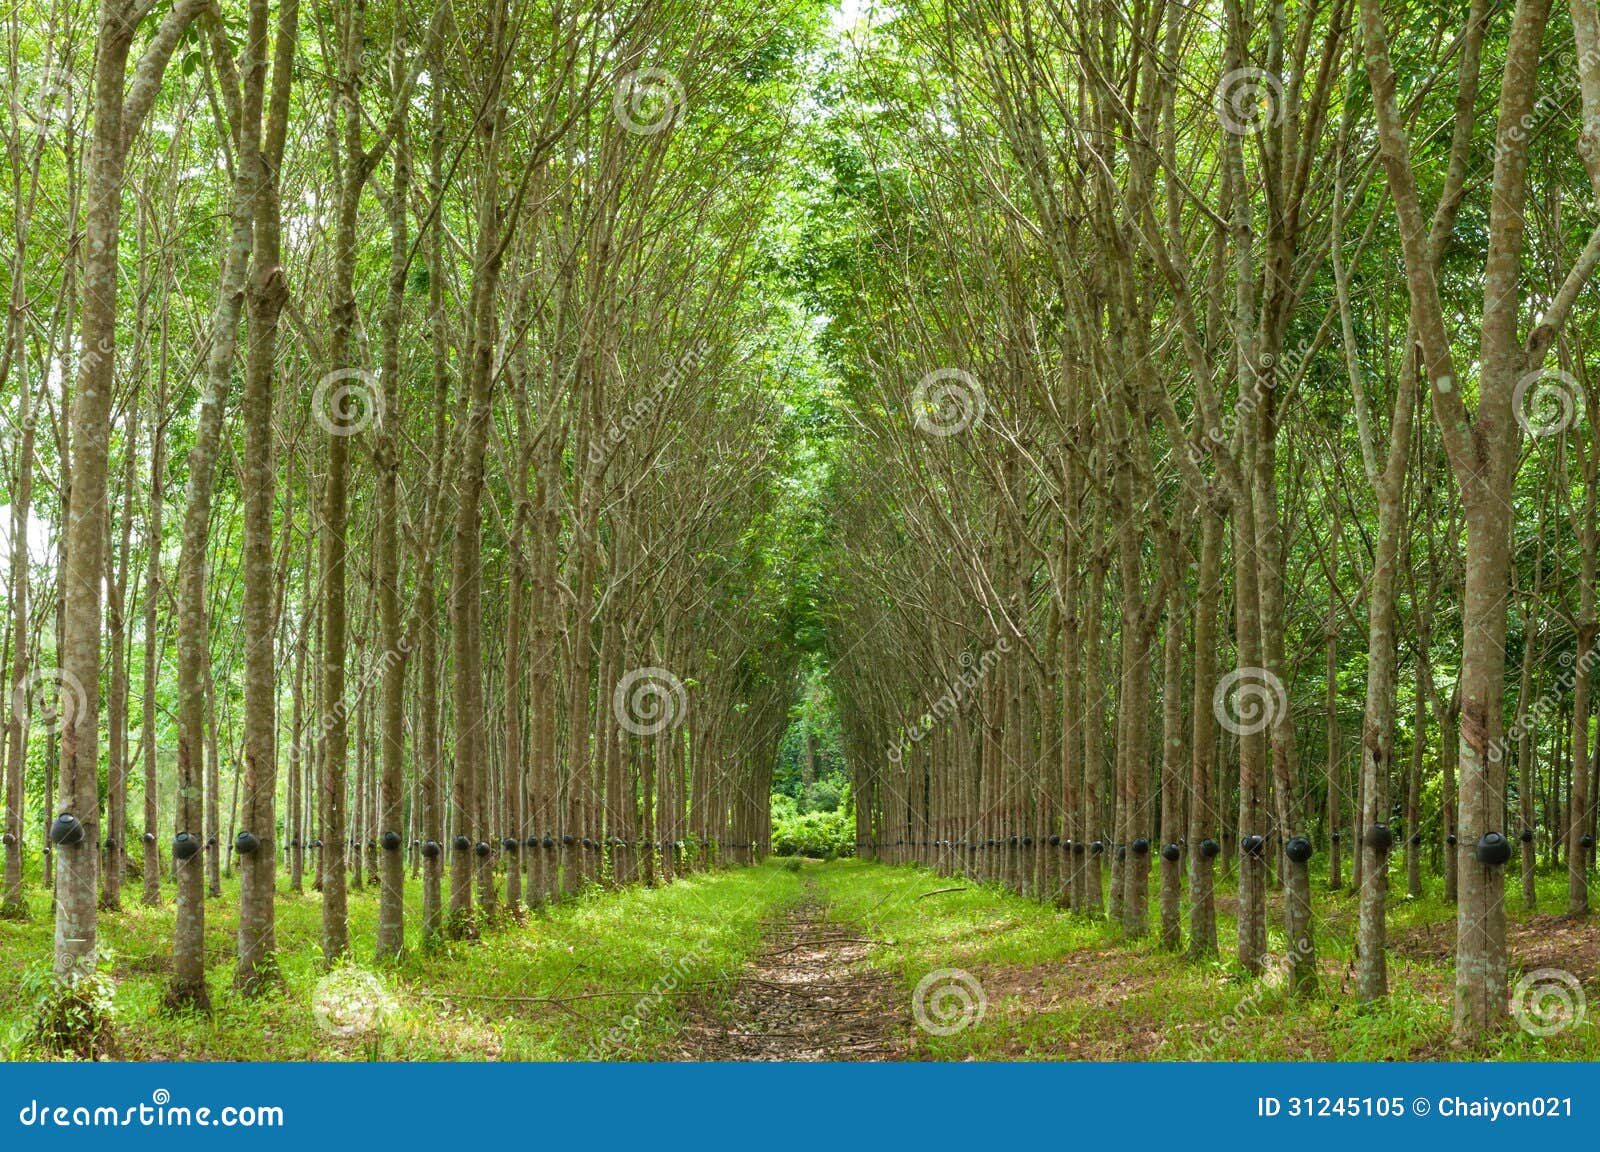 rubber tree background